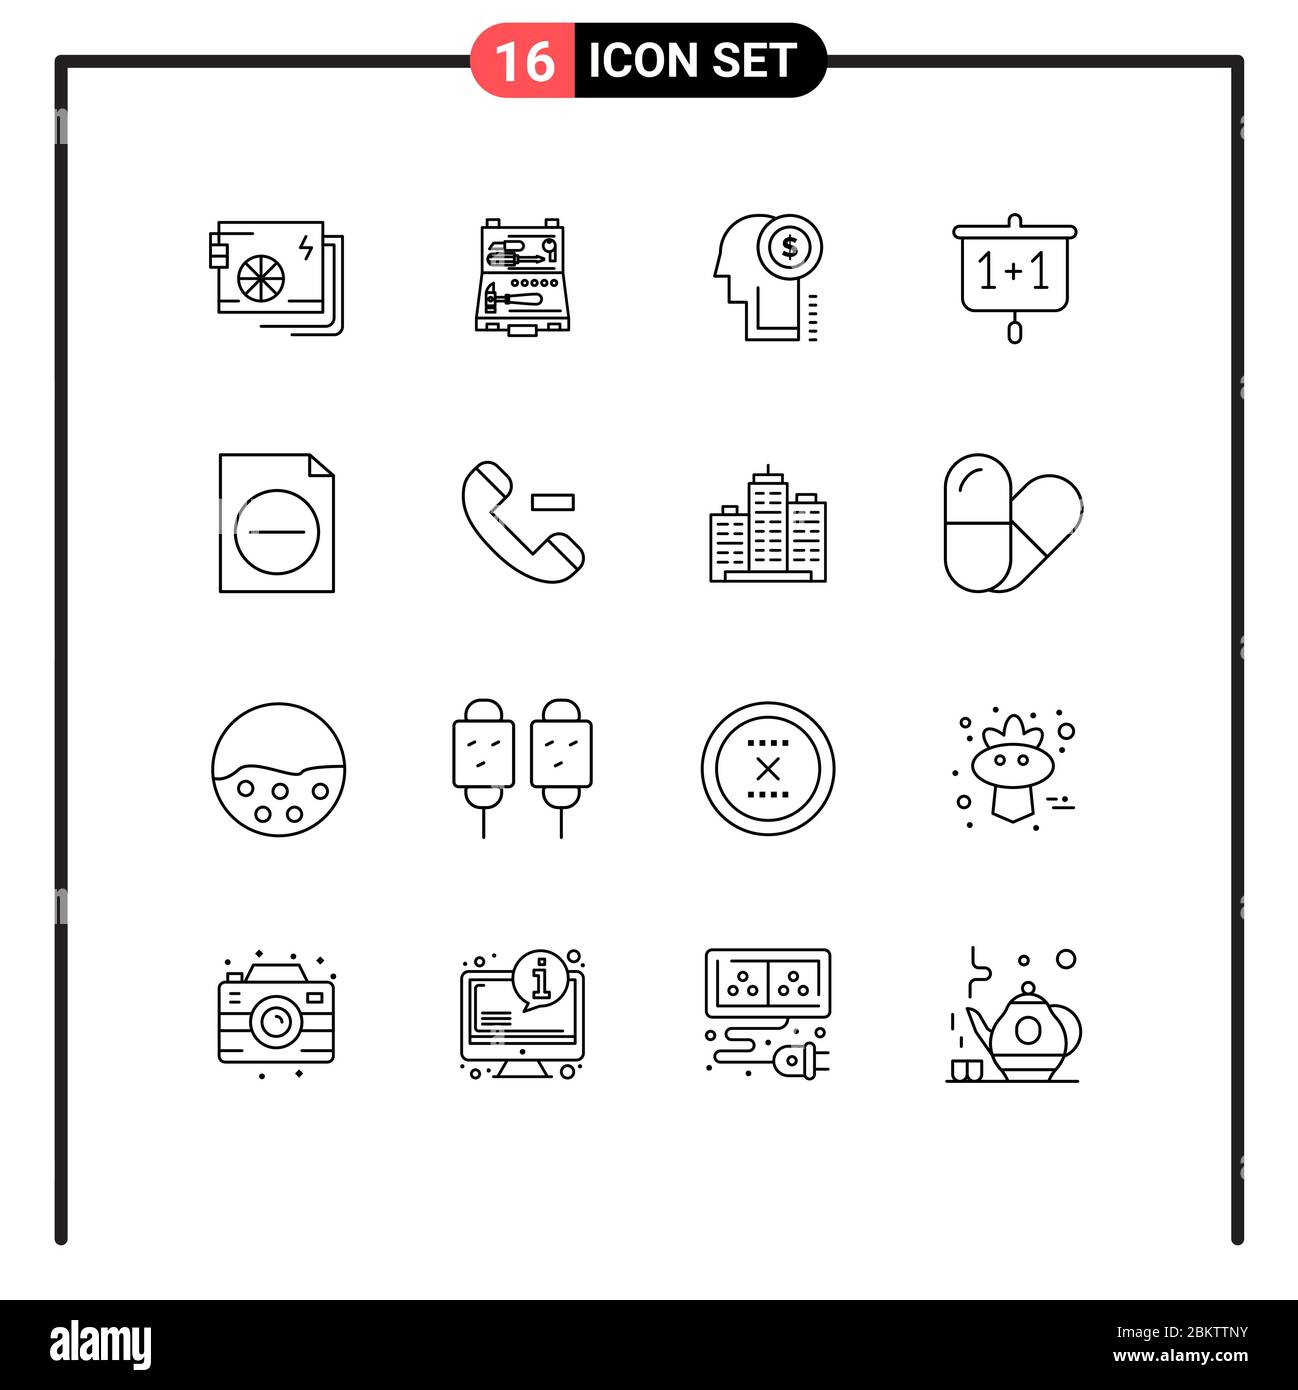 16 Outline concept for Websites Mobile and Apps school, education, repair, chart, money Editable Vector Design Elements Stock Vector